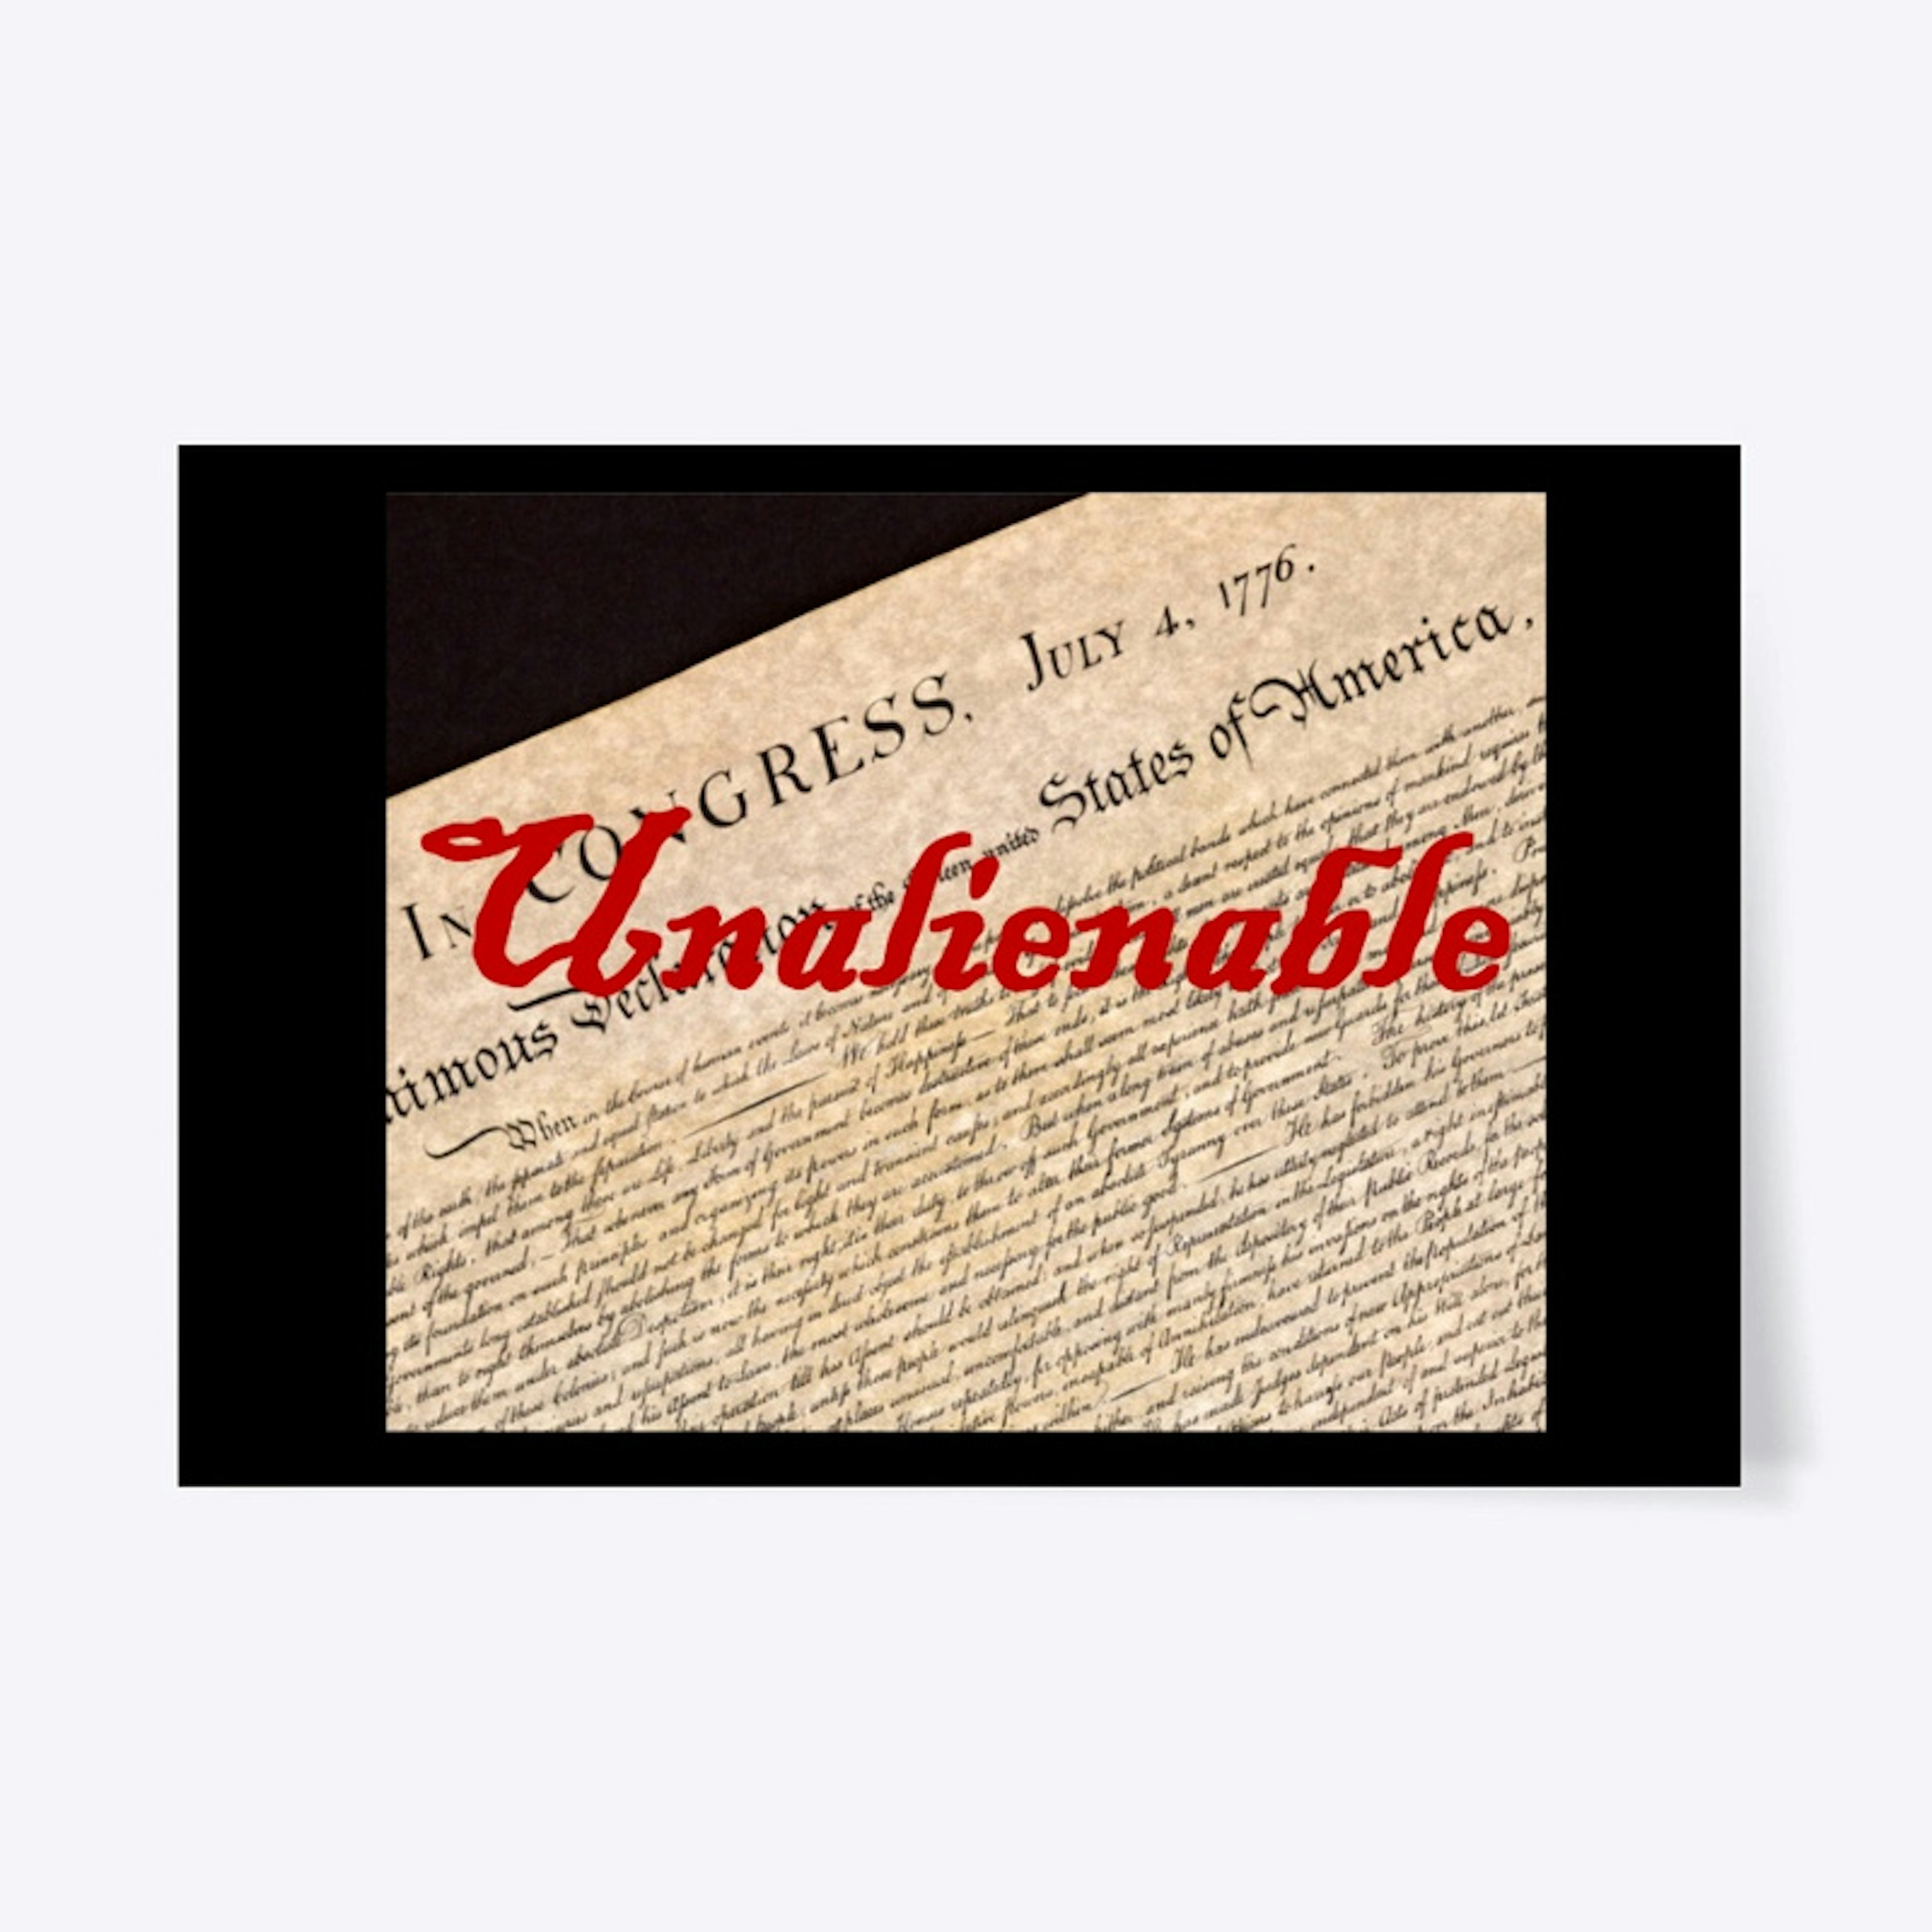 Unalienable Rights!